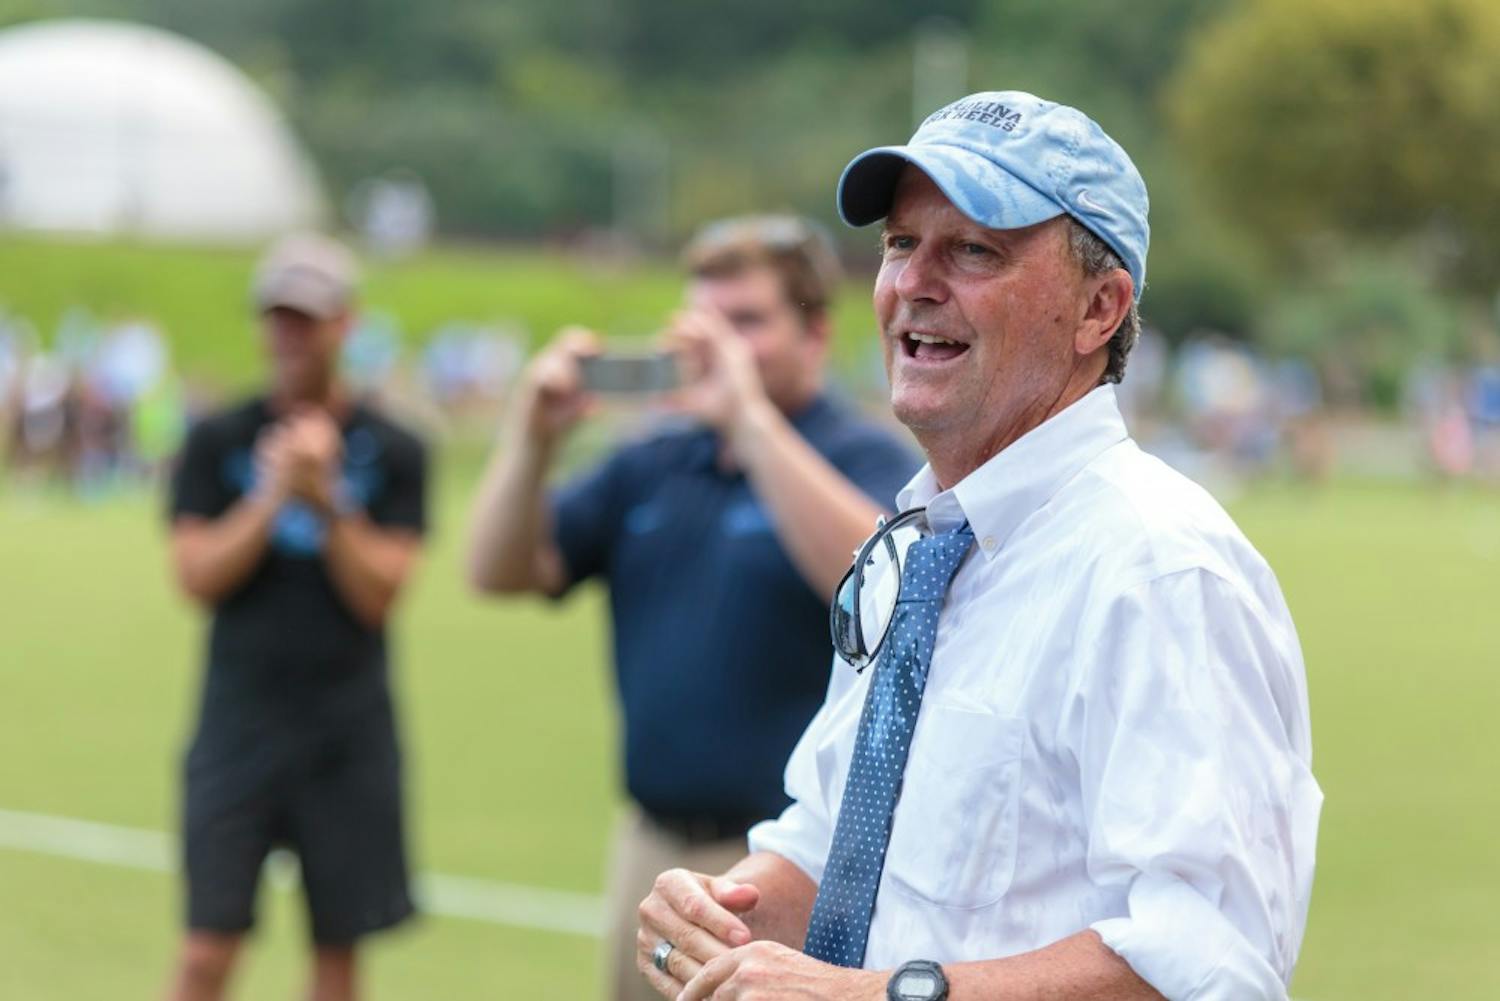 UNC women's soccer head coach Anson Dorrance looks on during his team's 2-0 win over Ohio State on Aug. 19 at Finley Fields South. The victory was his 1,000th in a decorated career.